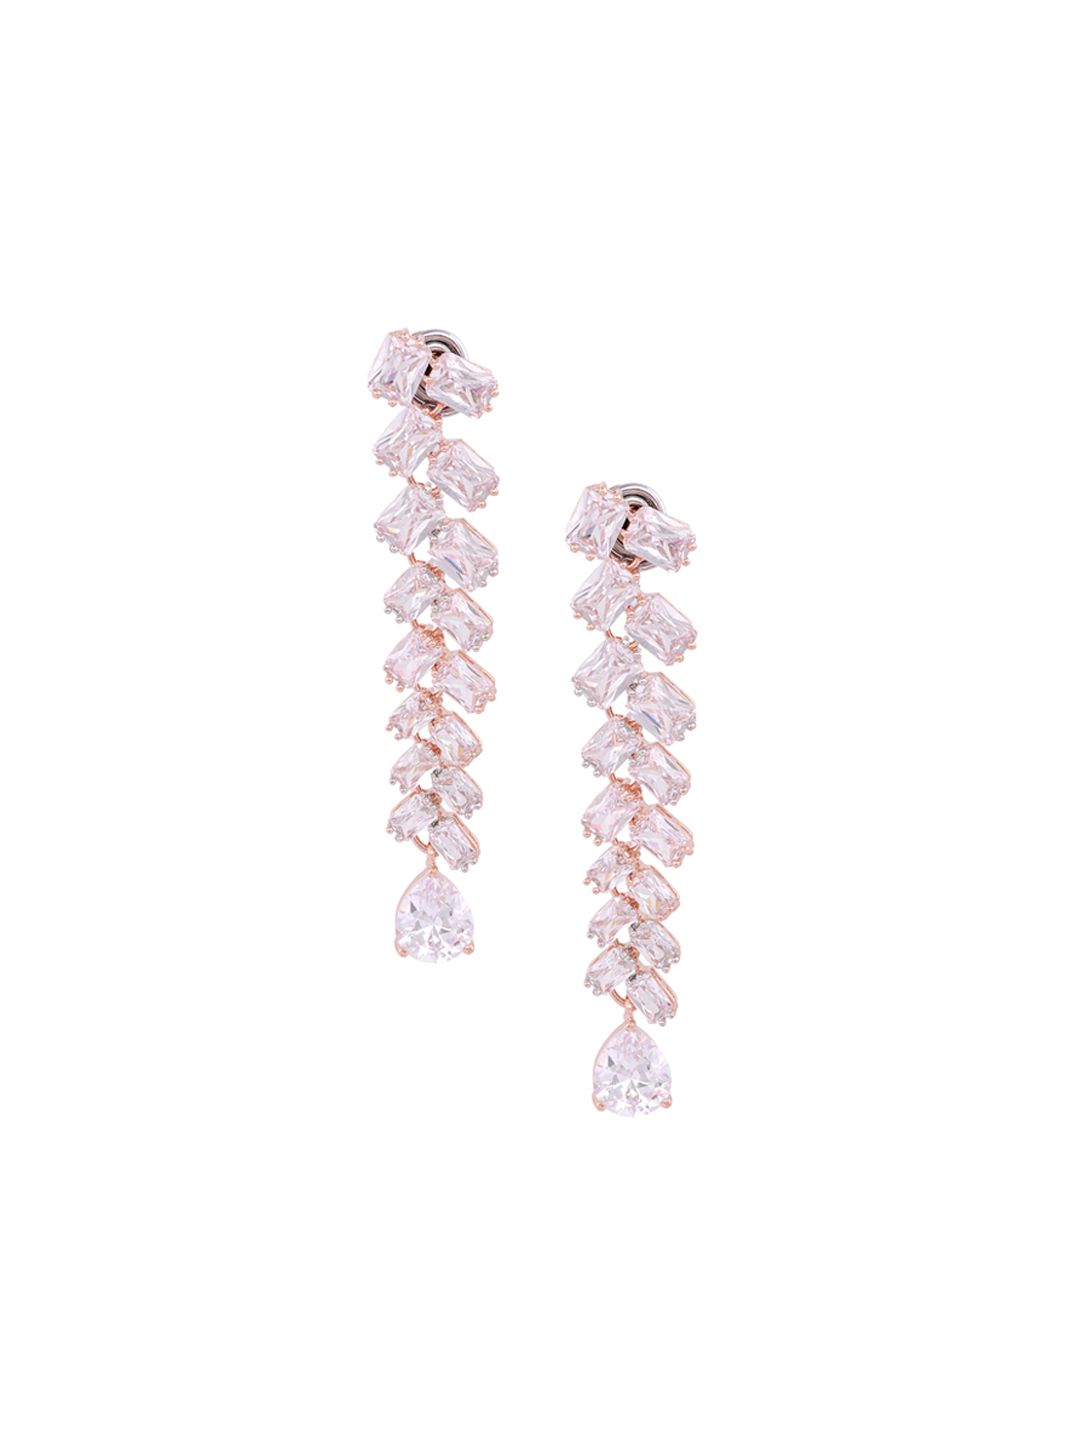 Saraf RS Jewellery White & Rose Gold-Plated Classic AD Studded Drop Earrings Price in India